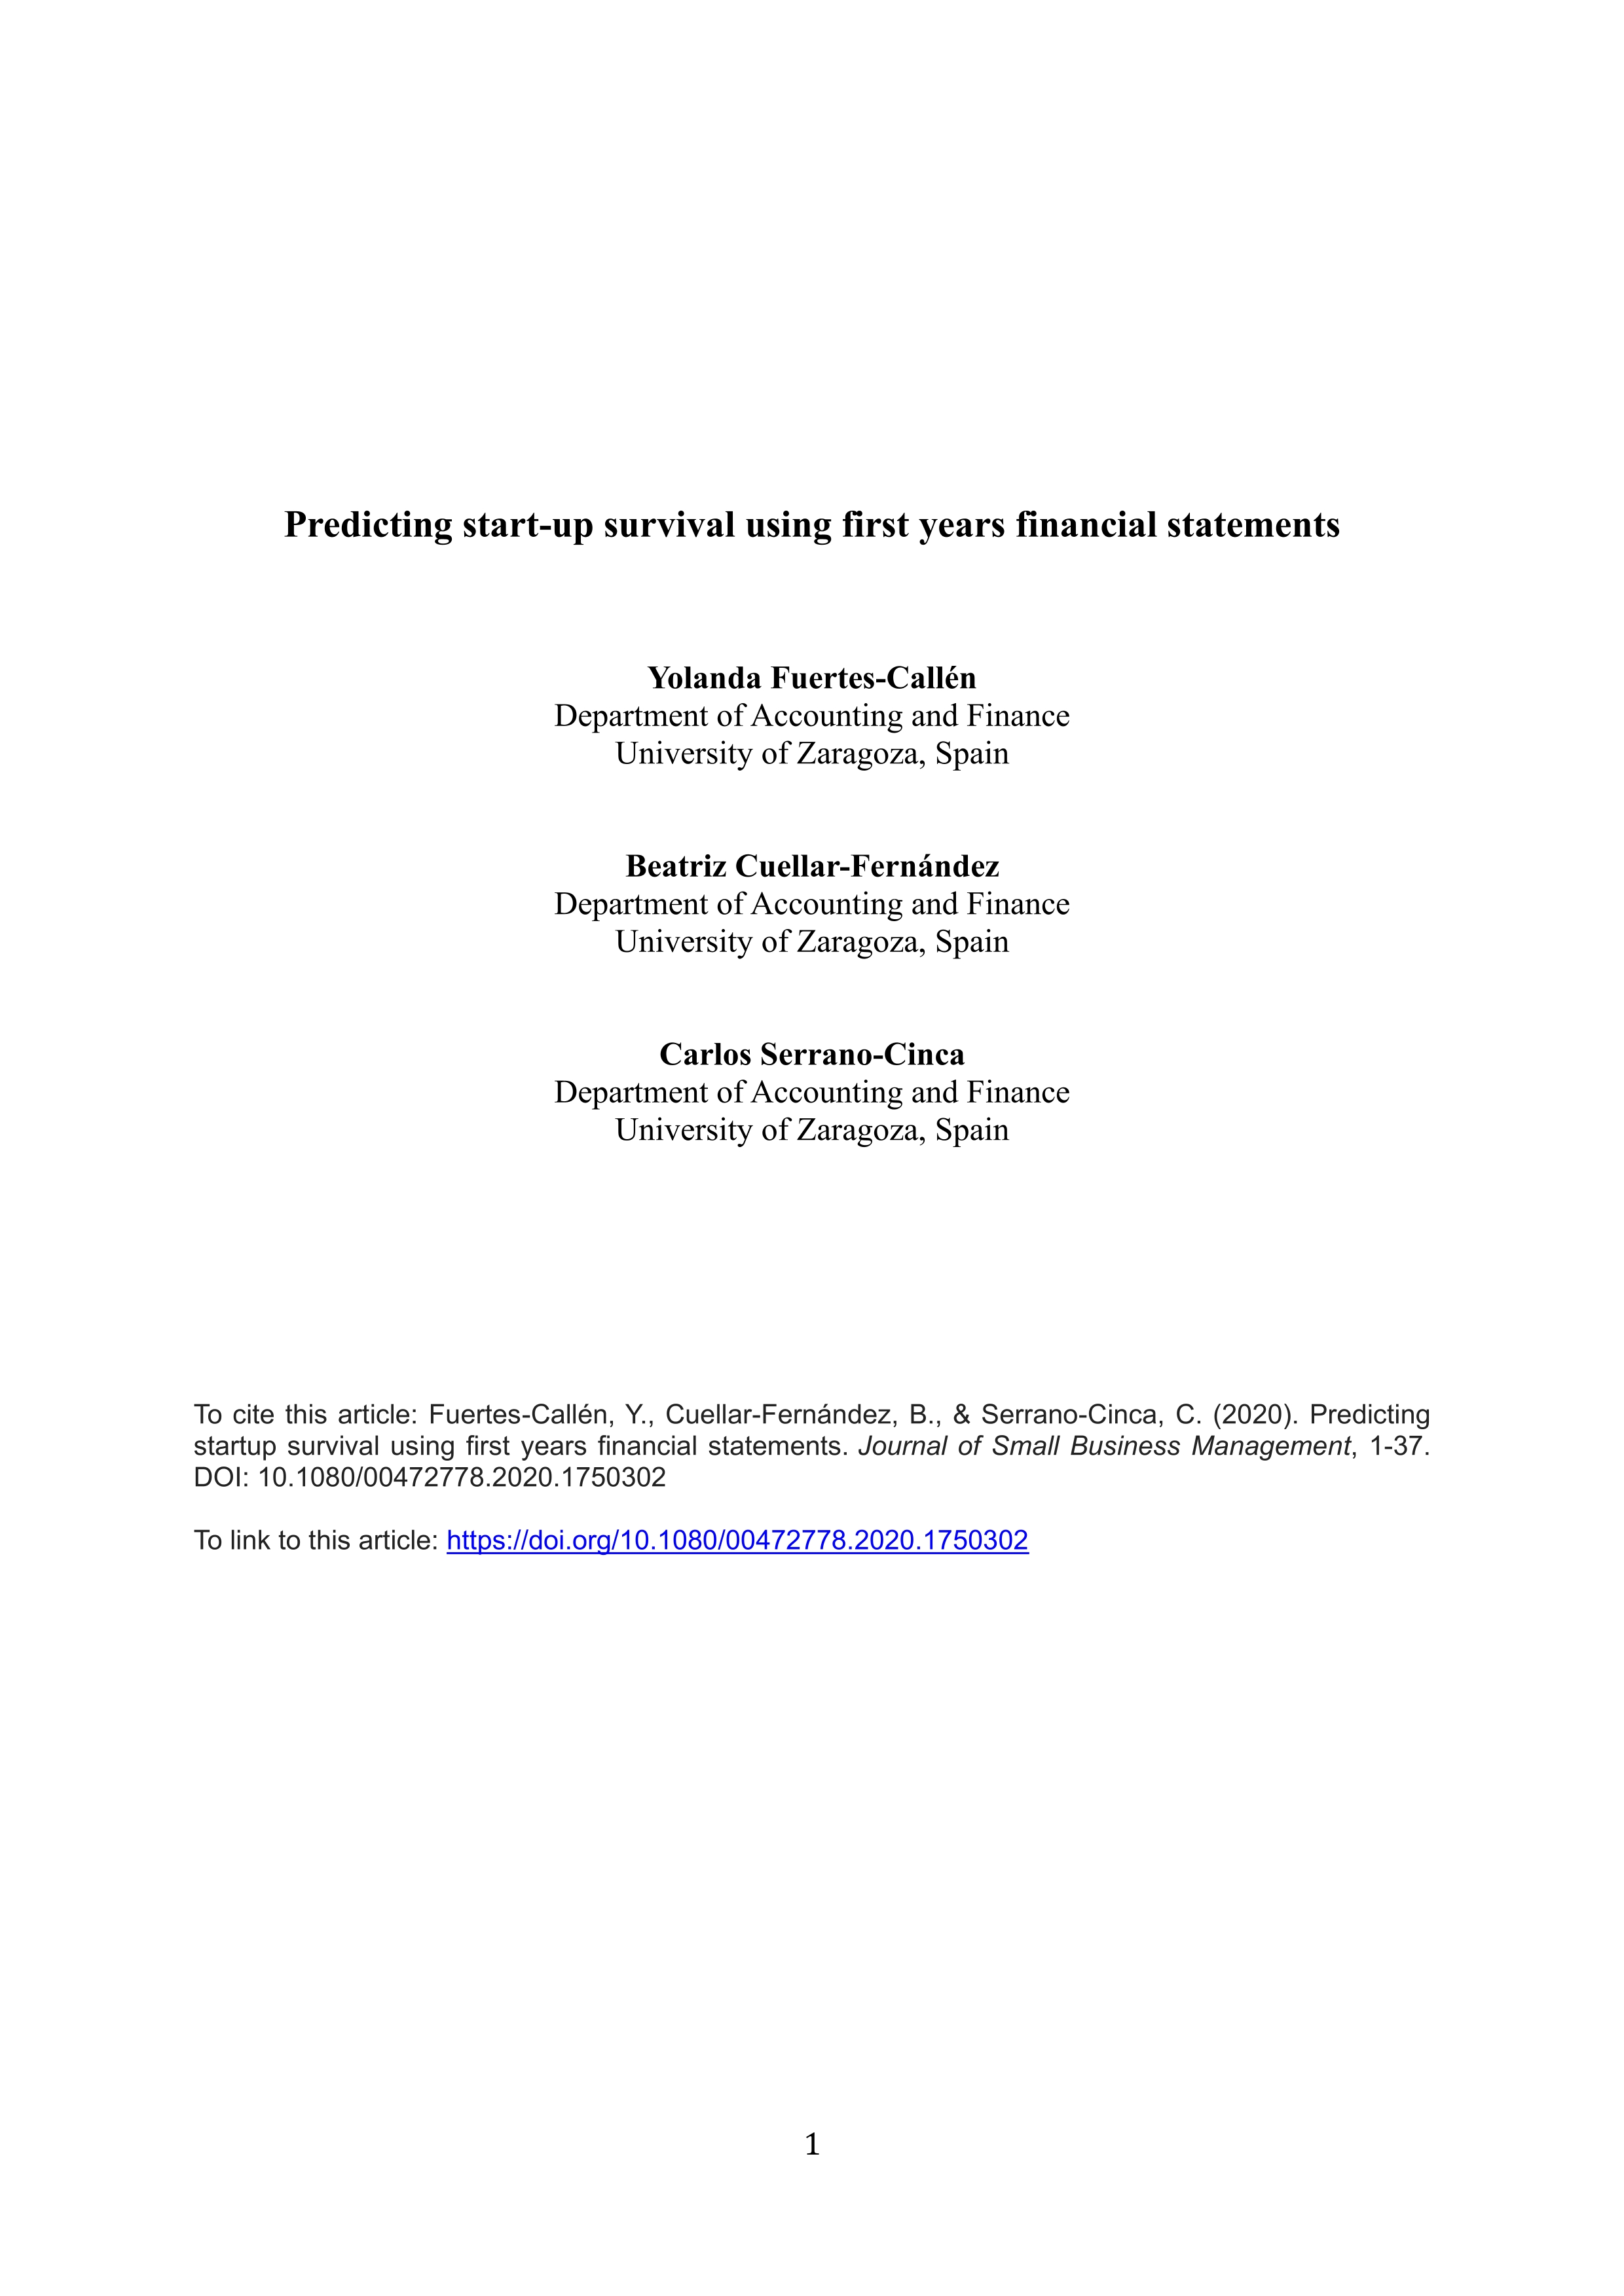 Predicting startup survival using first years financial statements